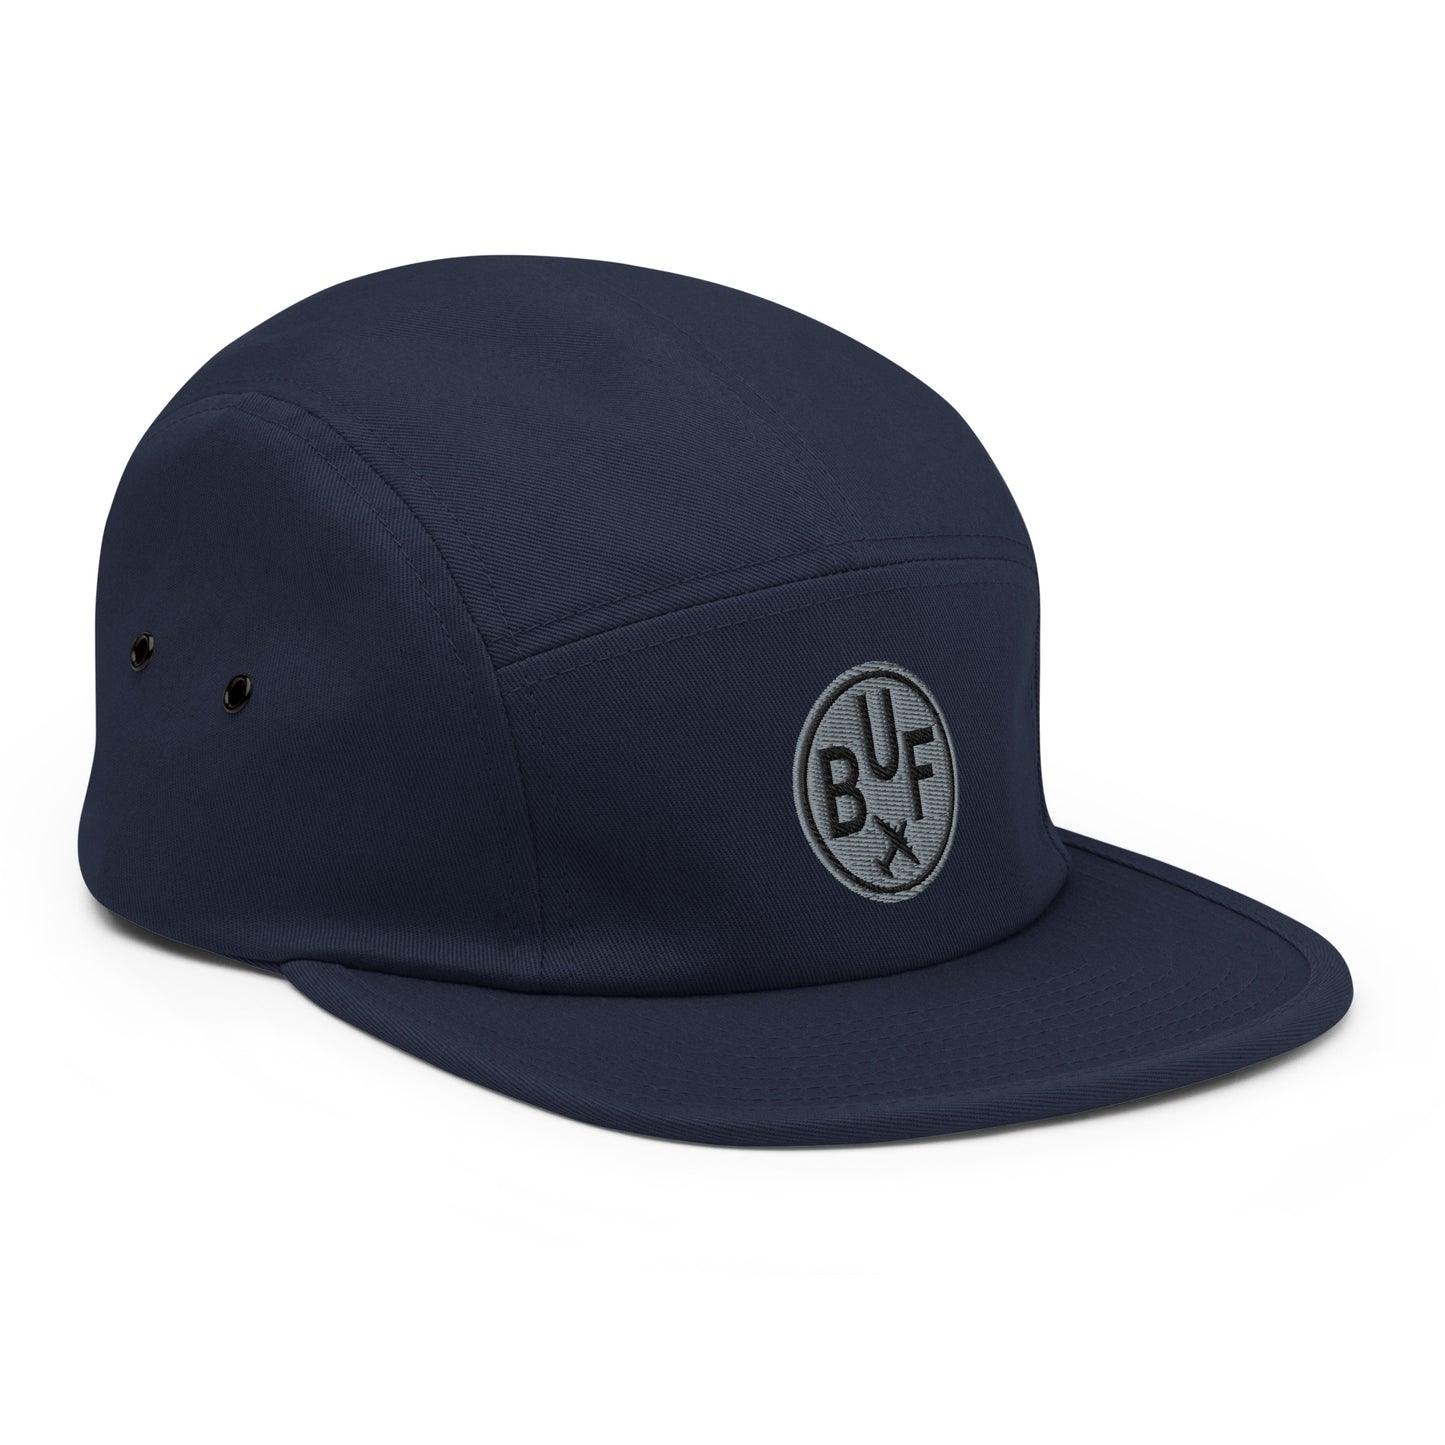 Airport Code Camper Hat - Roundel • BUF Buffalo • YHM Designs - Image 13